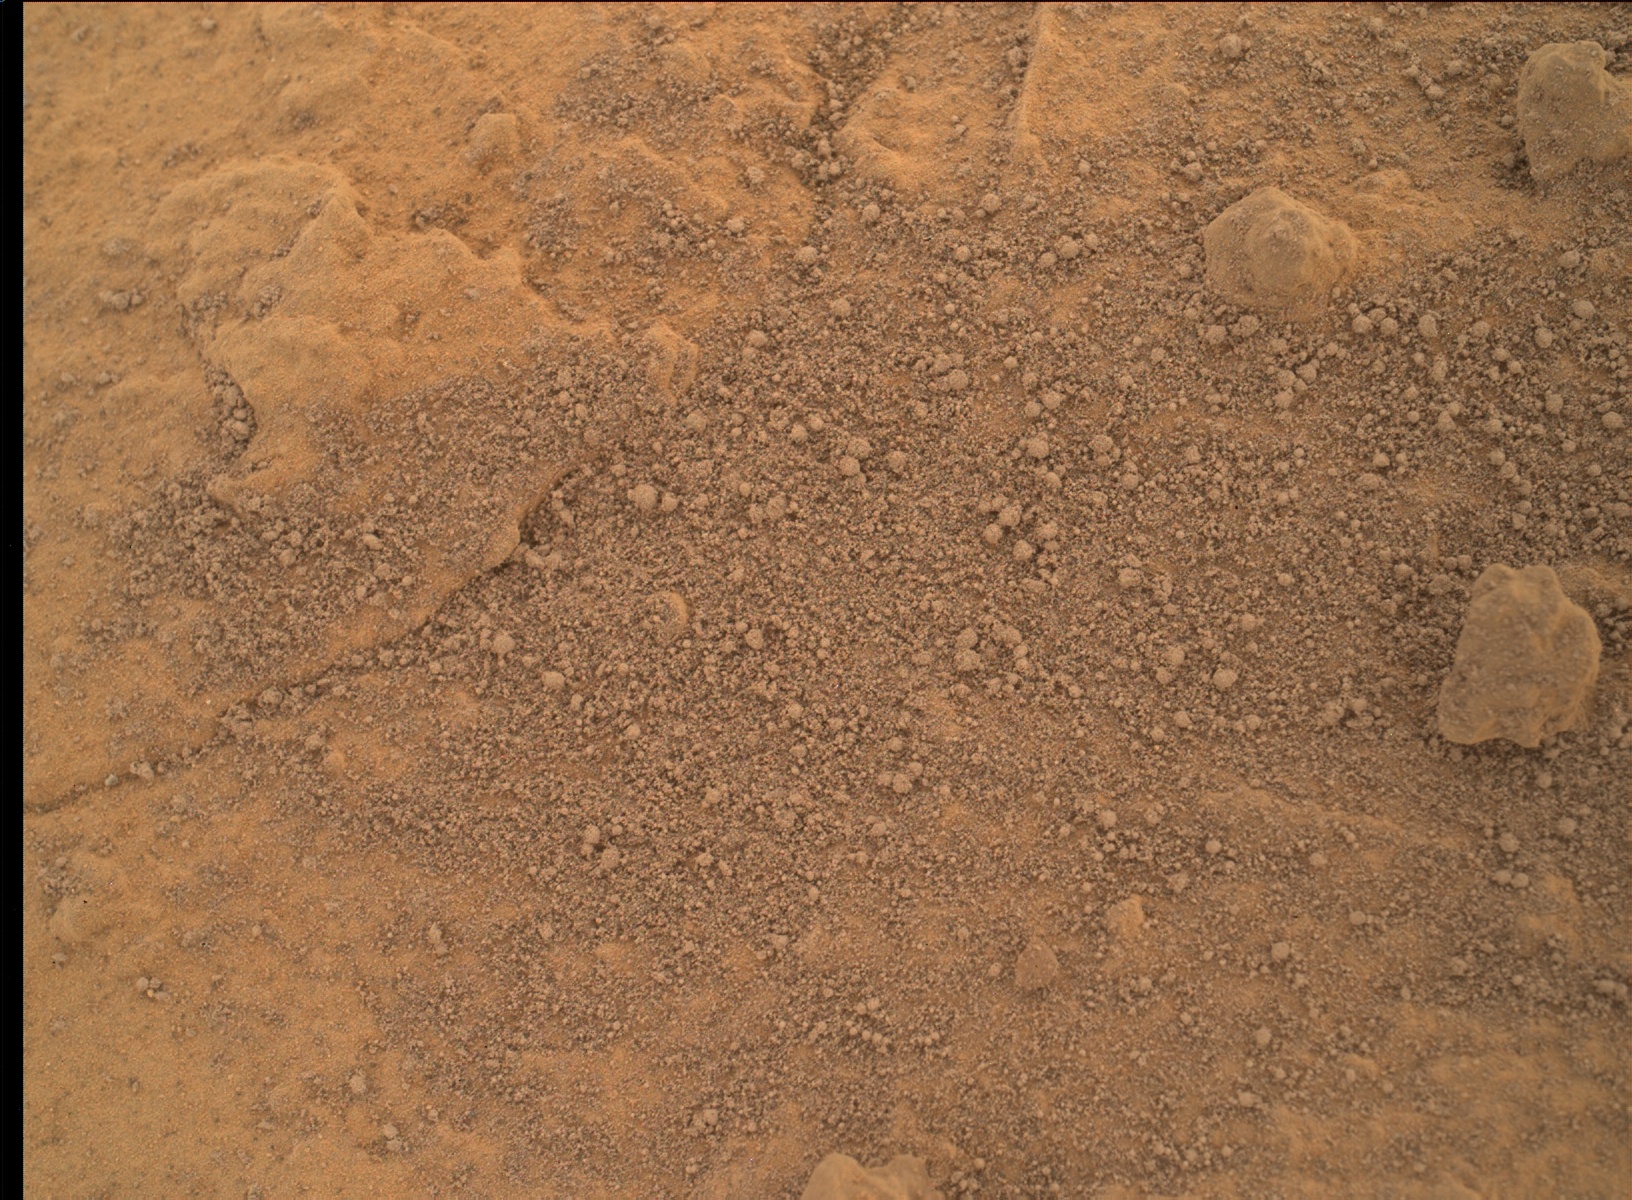 Nasa's Mars rover Curiosity acquired this image using its Mars Hand Lens Imager (MAHLI) on Sol 1460